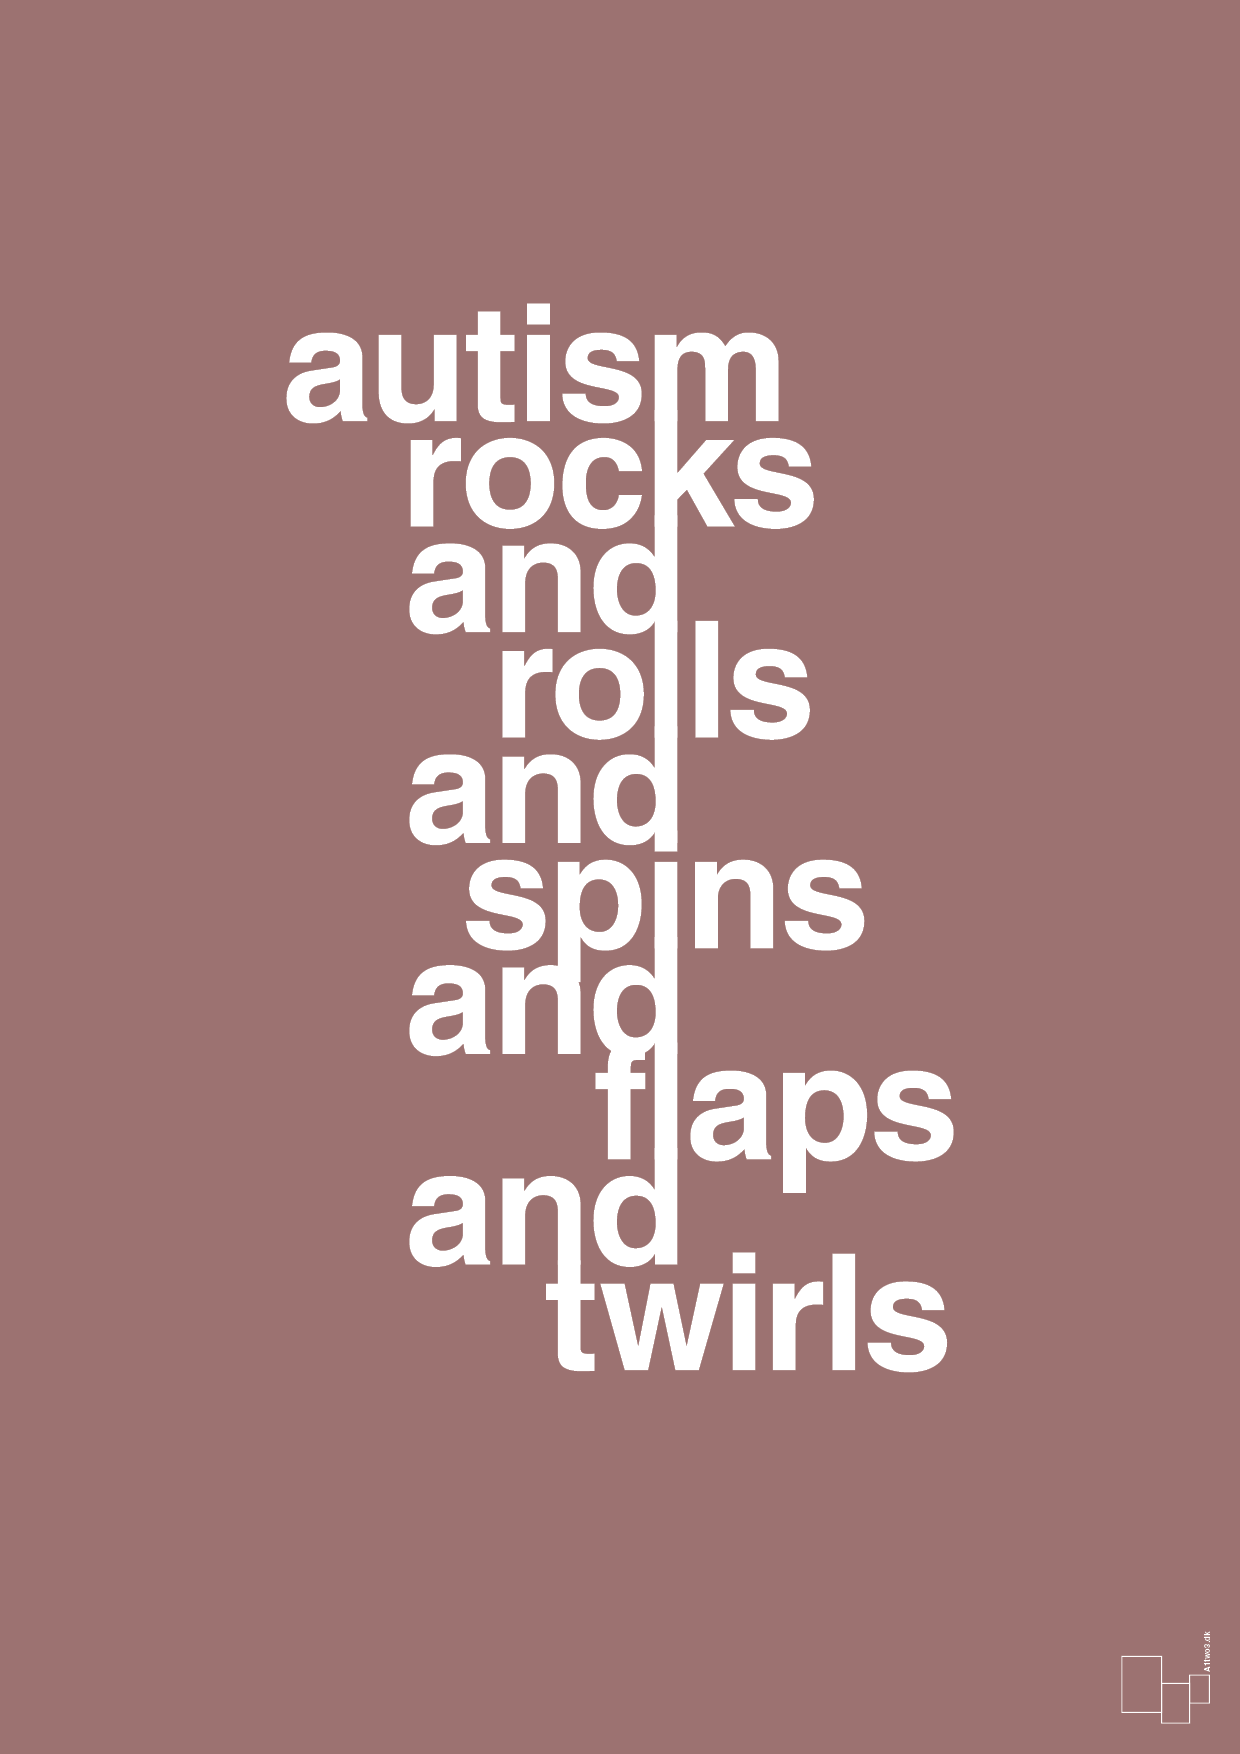 autism rocks and rolls and spins and flaps and twirls - Plakat med Samfund i Plum